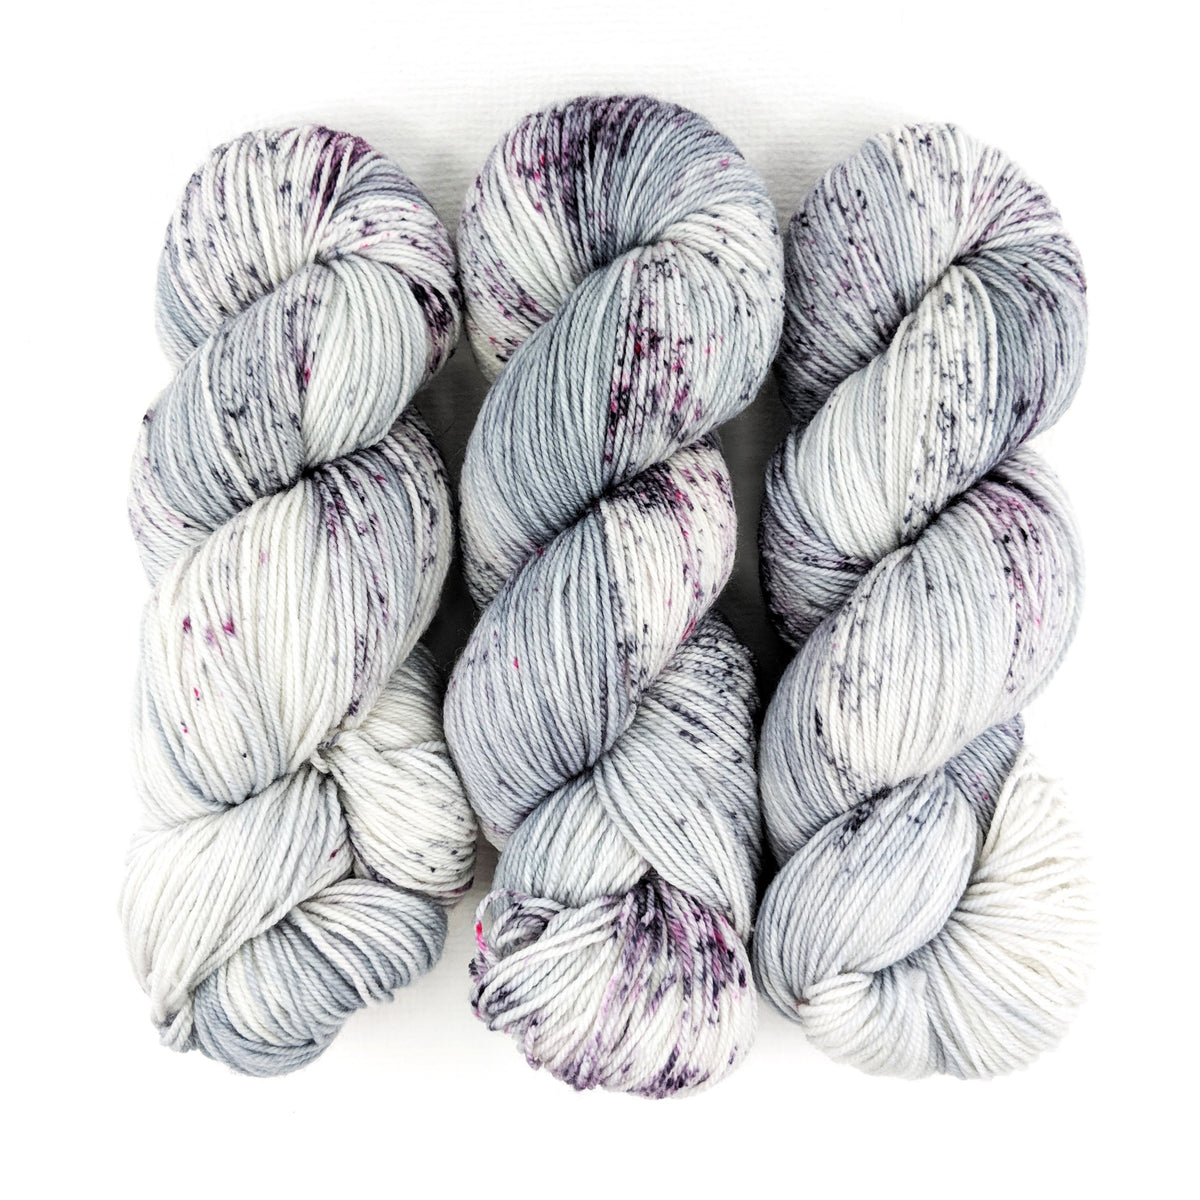 Paperweight - Merino DK / Light Worsted - Dyed Stock